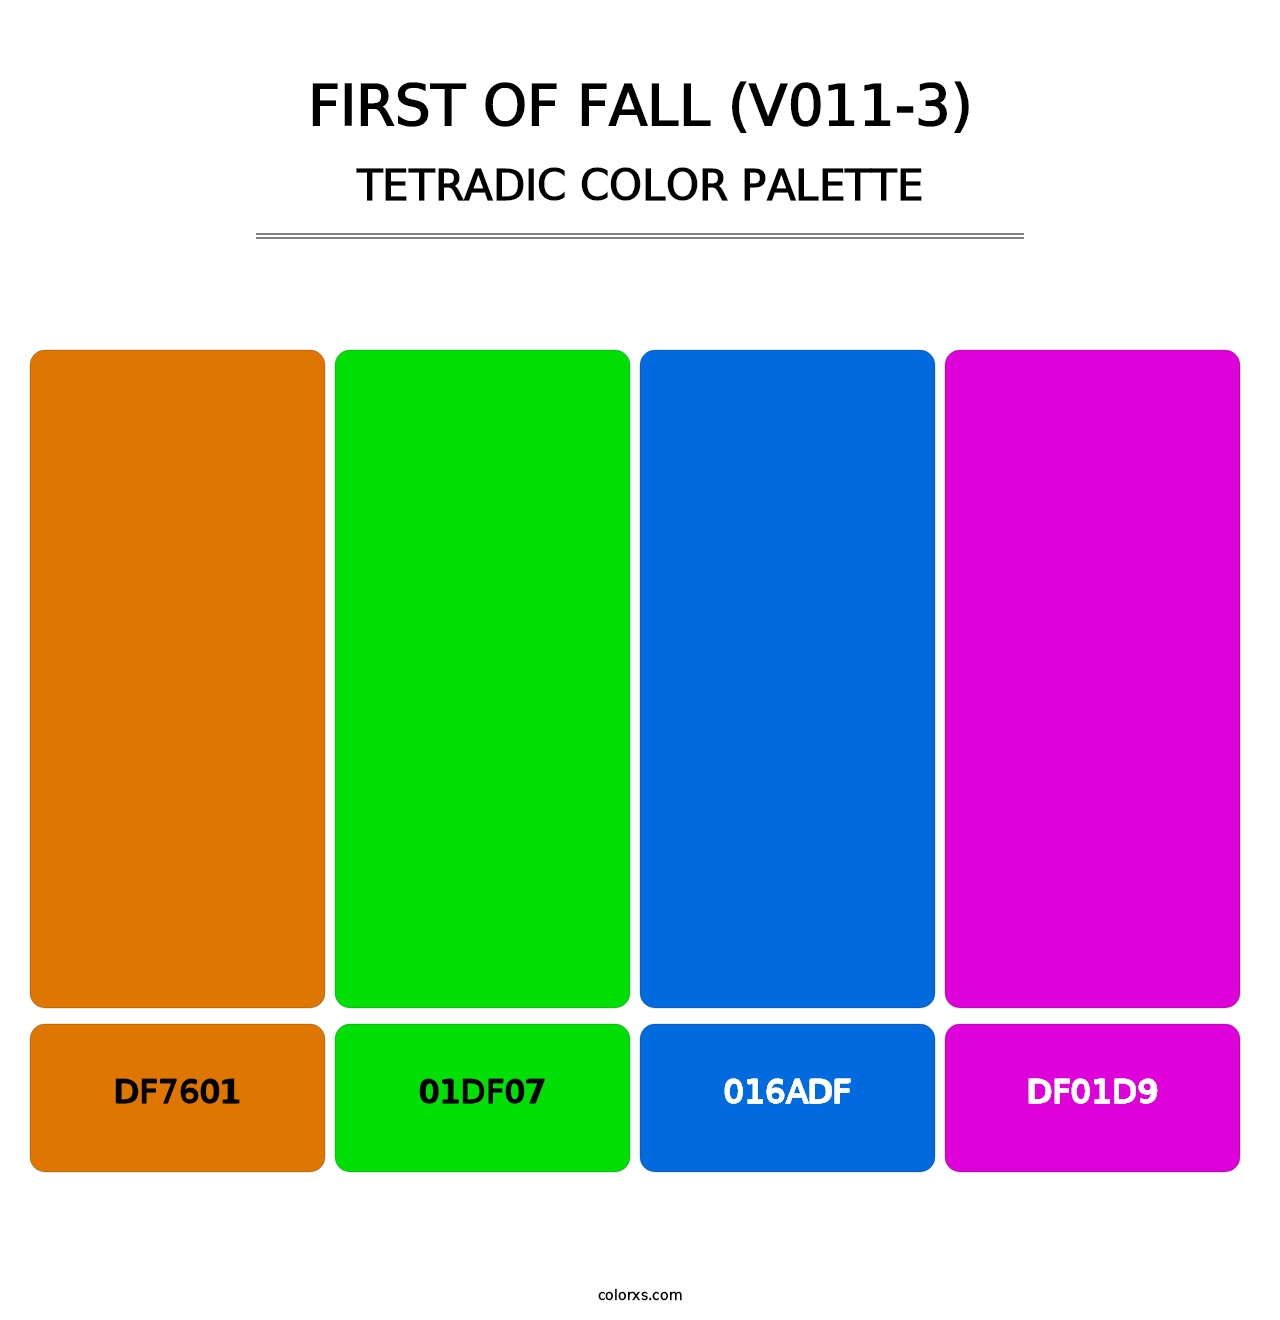 First of Fall (V011-3) - Tetradic Color Palette